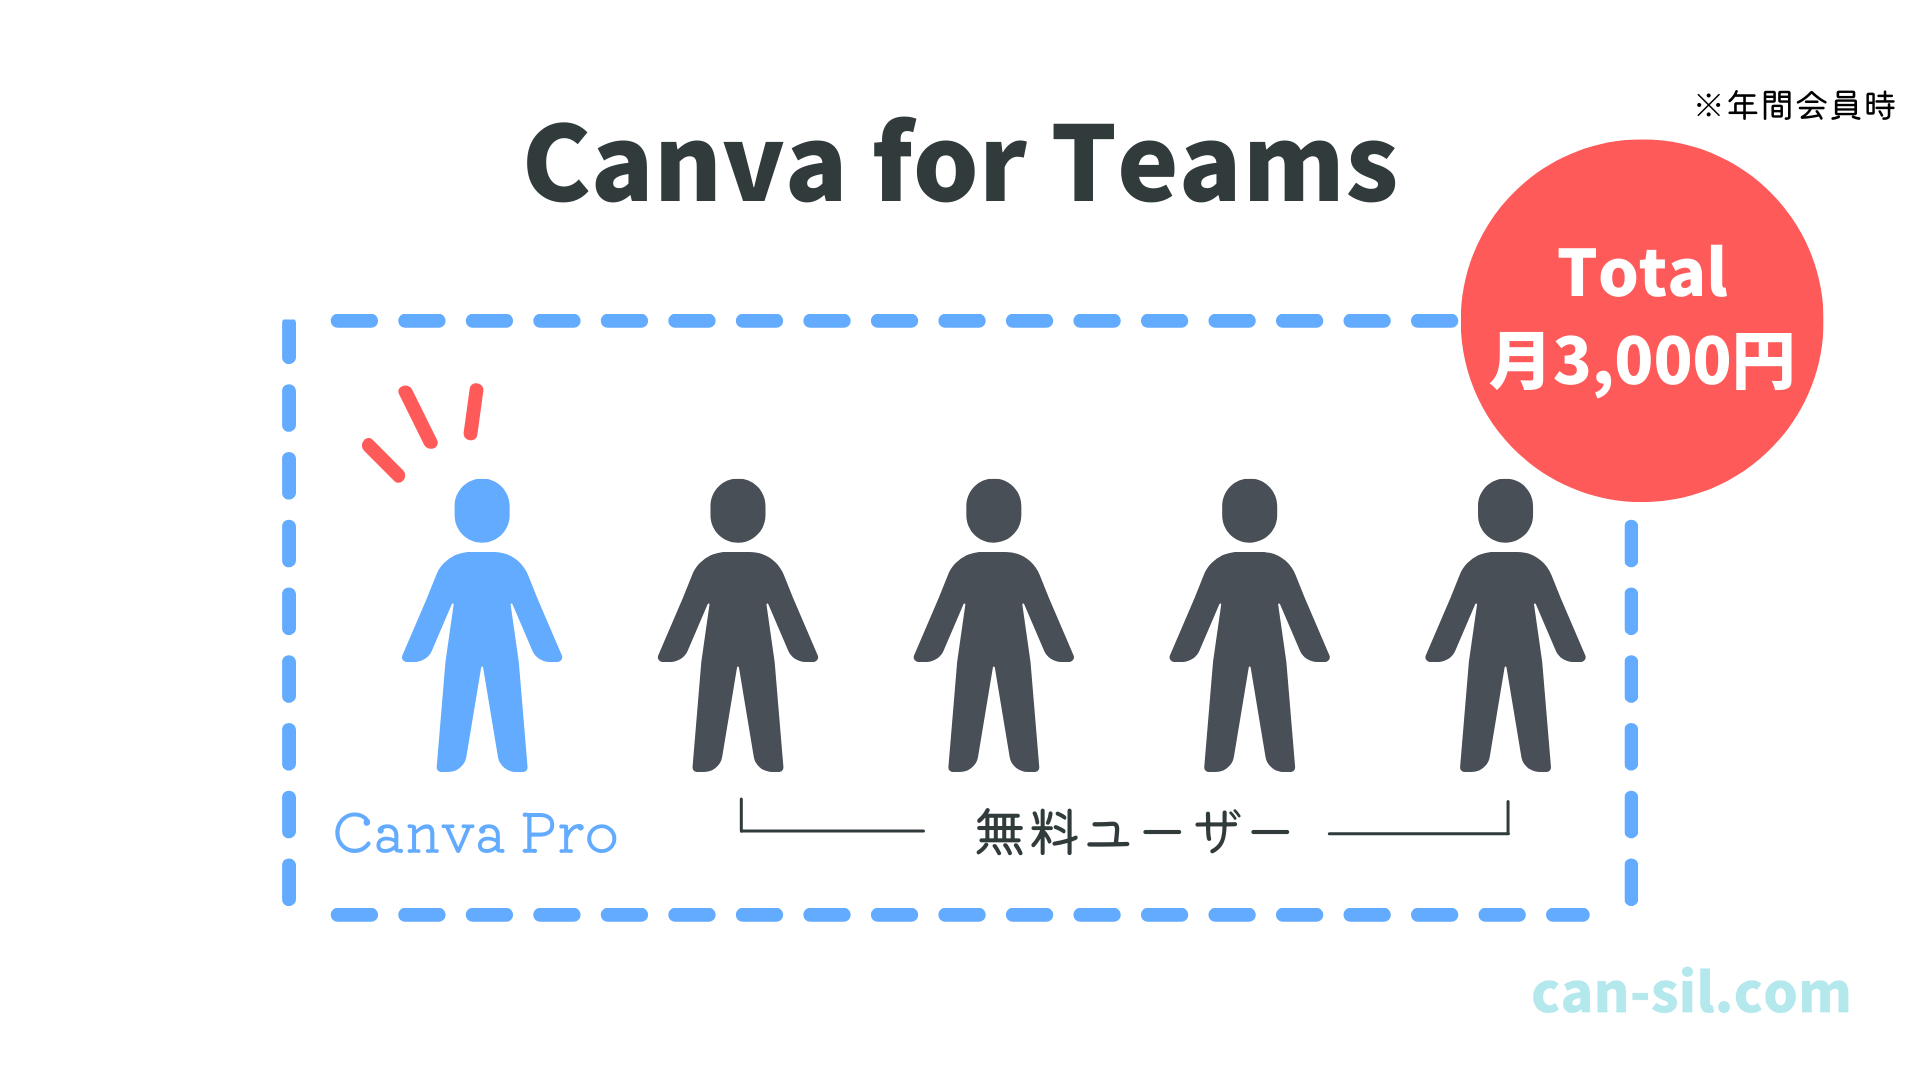 Canva for Teamsの料金